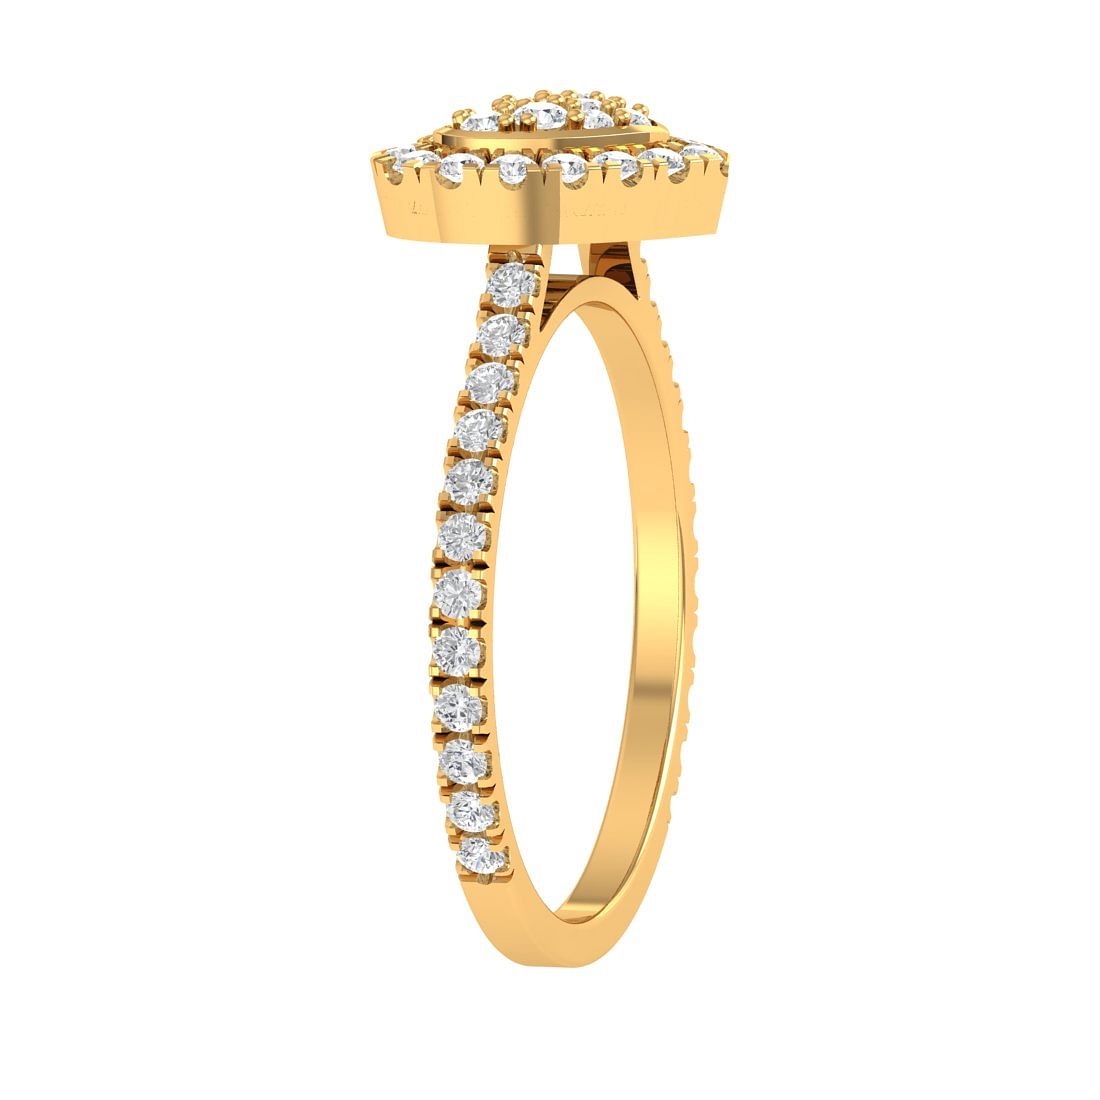 Yellow Gold Ivy Heart Shape Women Diamond Ring For Her